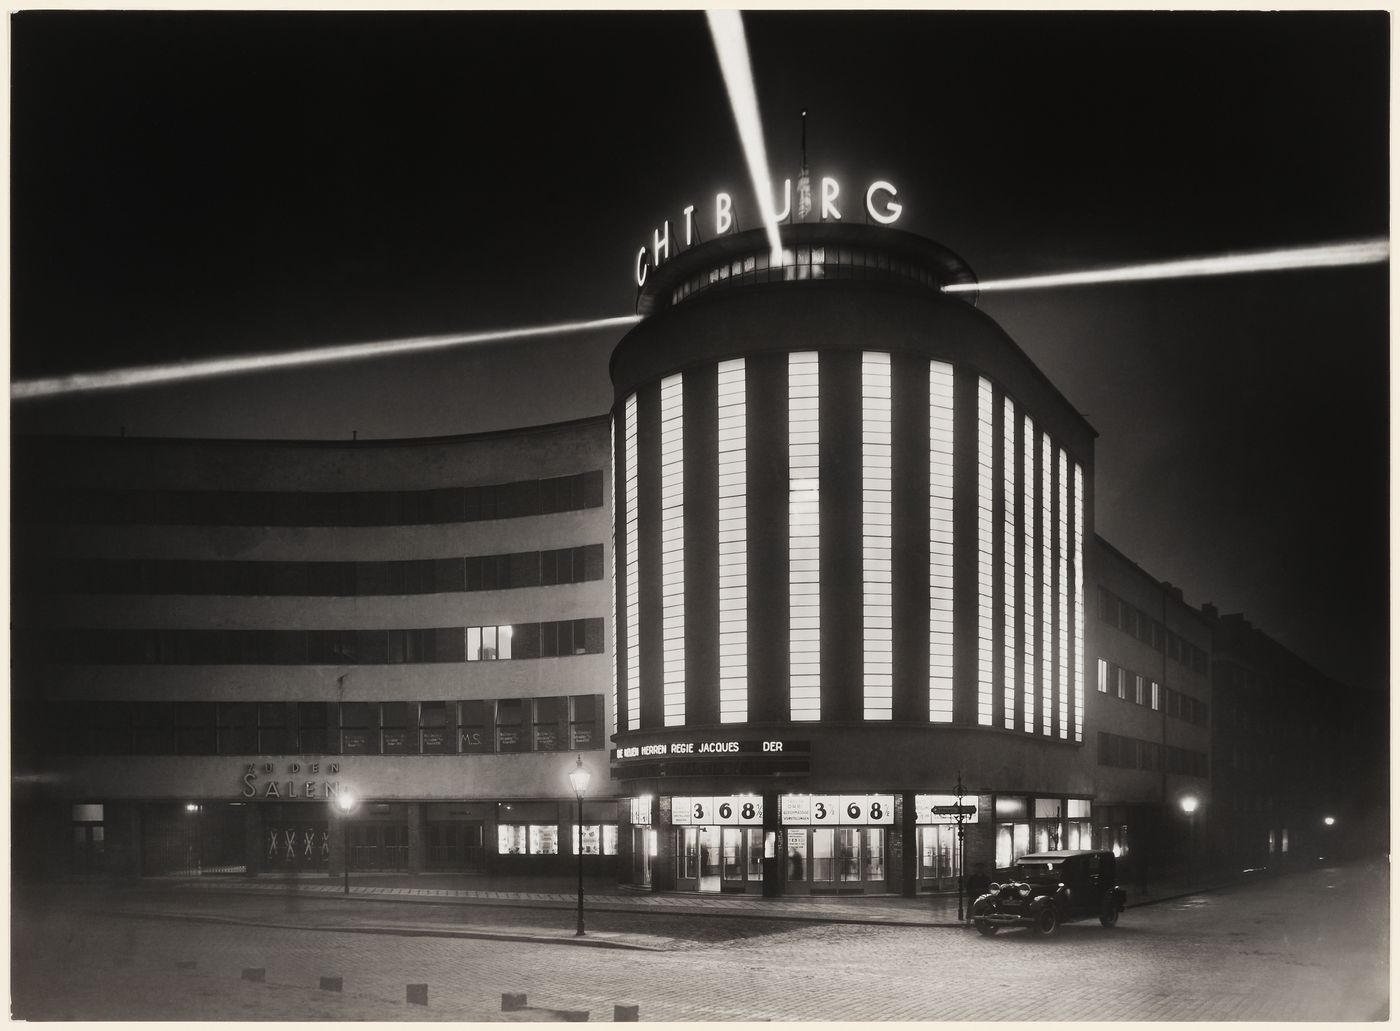 Night view of movie theater with light beacons near roof and large illuminated windows, Germany